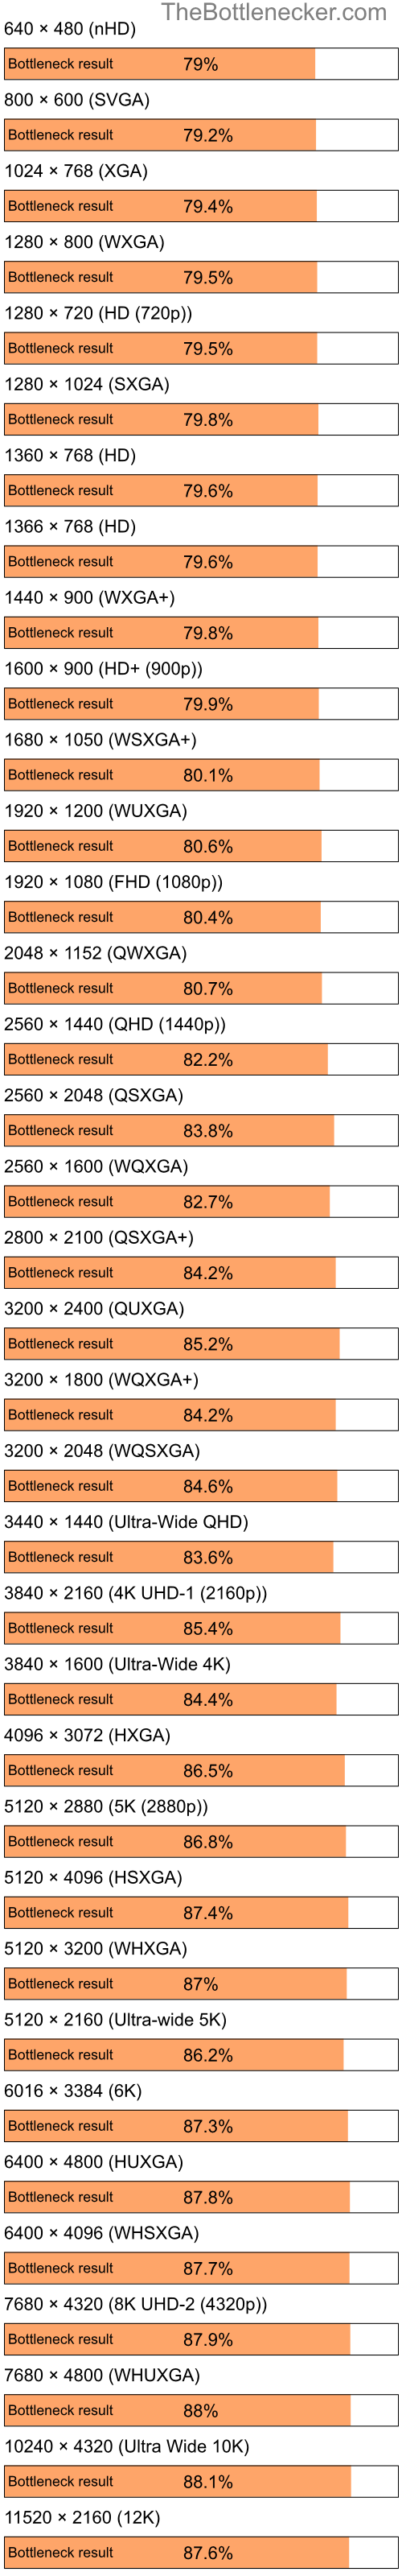 Bottleneck results by resolution for Intel Celeron and AMD Mobility Radeon 9600 in Graphic Card Intense Tasks